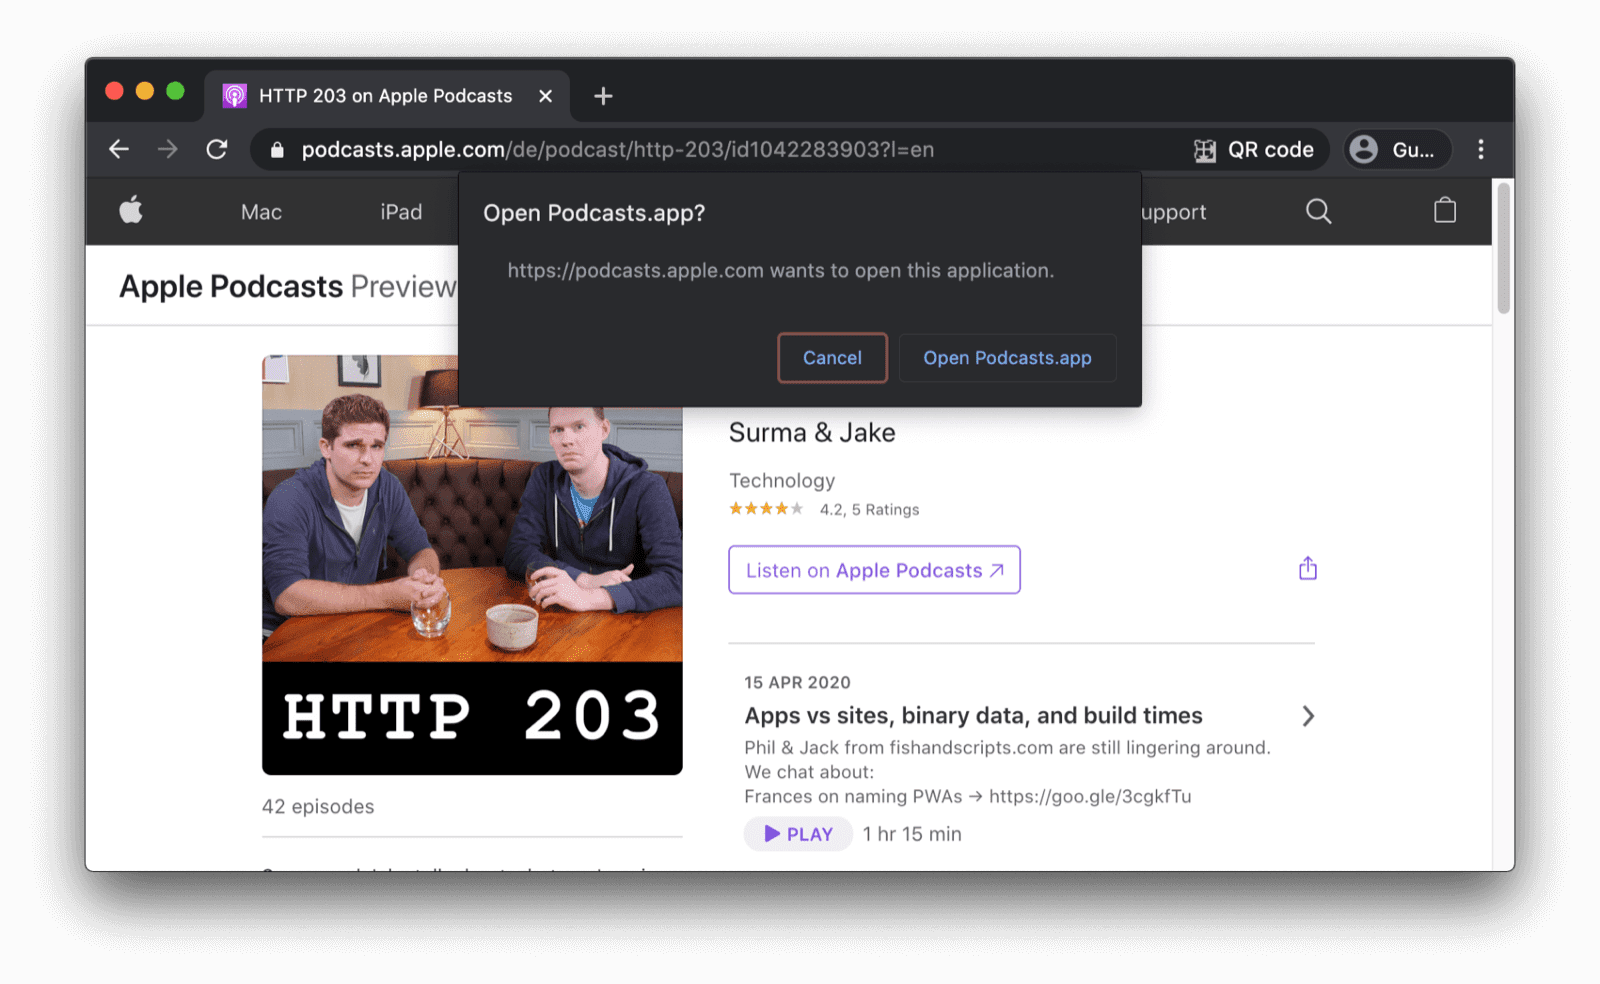 The Chrome browser showing a confirmation dialog asking the user whether they want to open the Podcasts app.